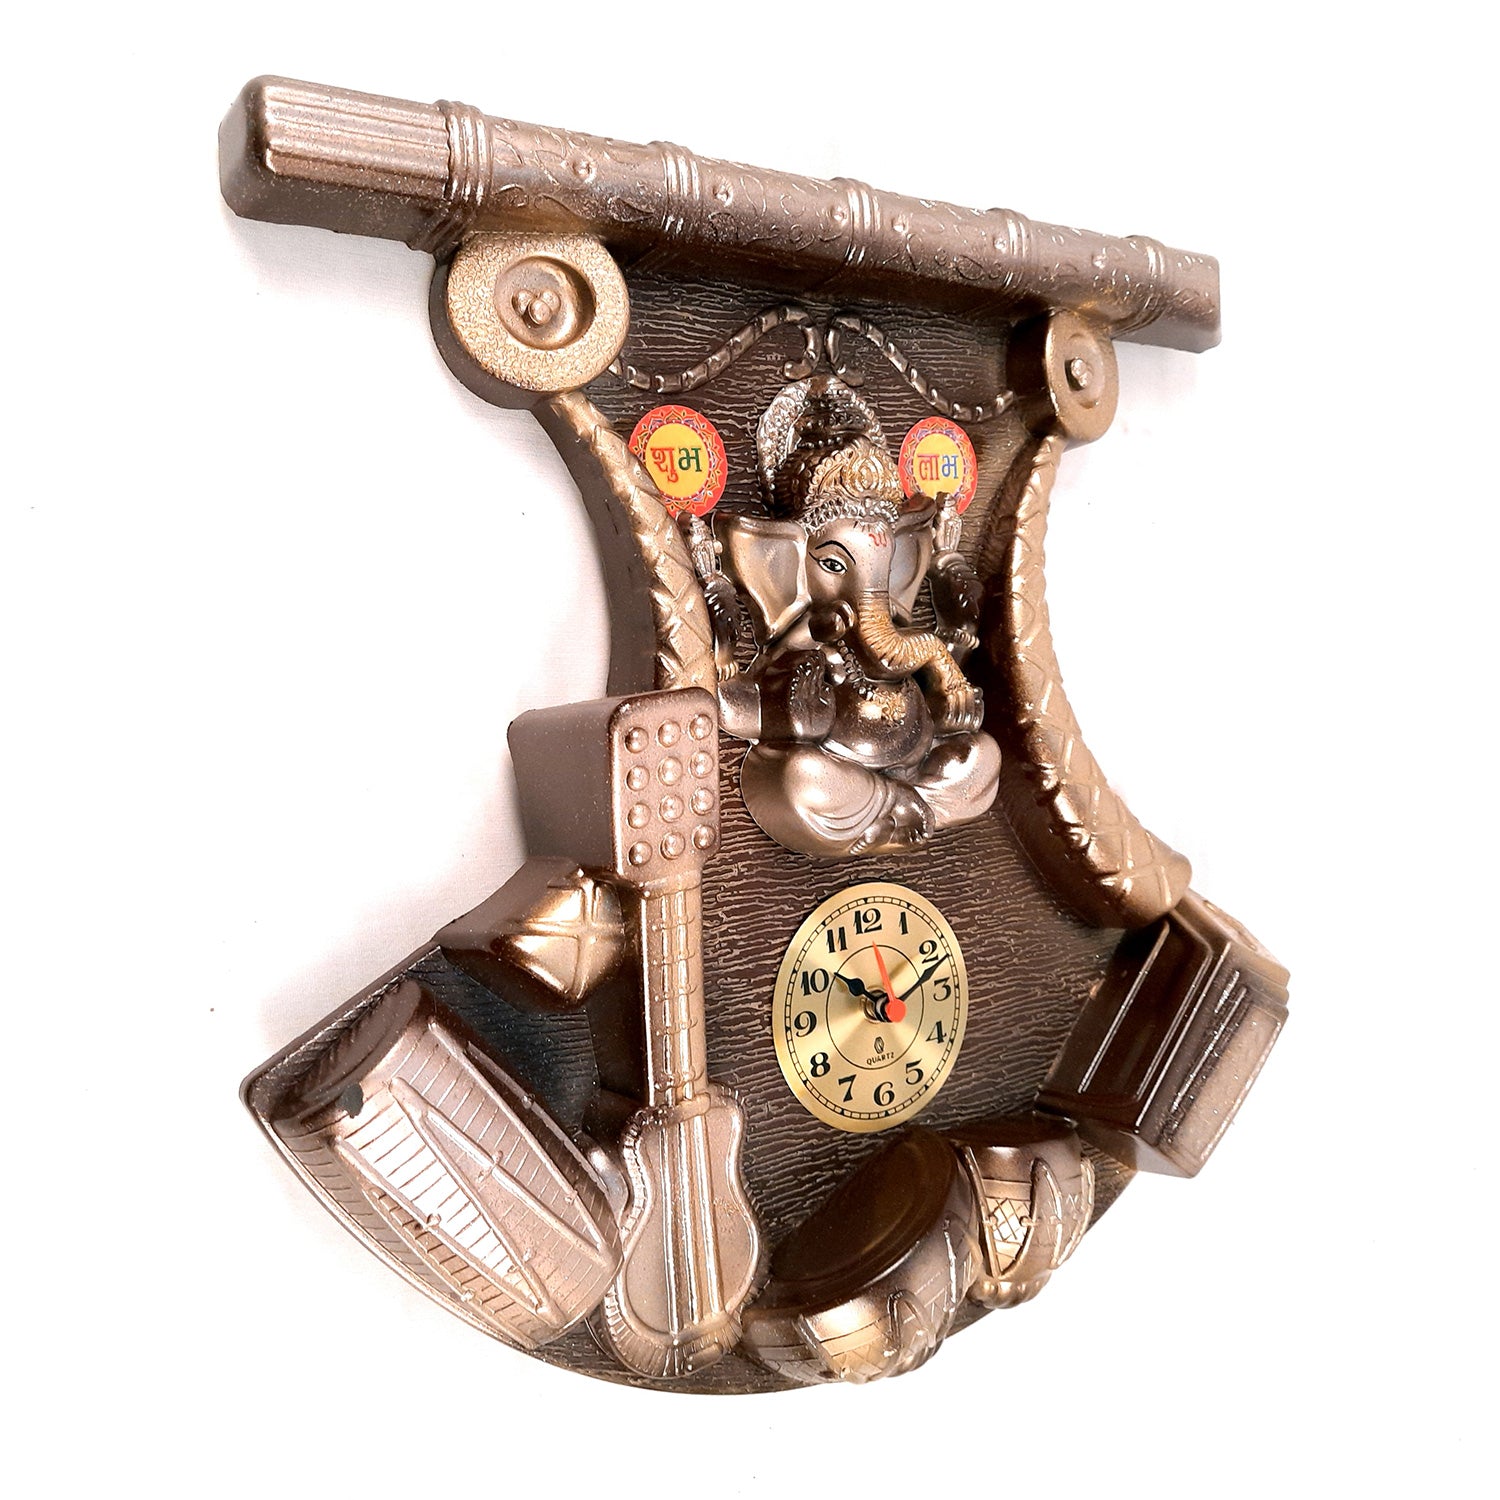 Wall Clock | Ganesh Wall Hanging With Small Clock - For Living Room, Bedroom, Hall, Office Decor & Gift - Apkamart